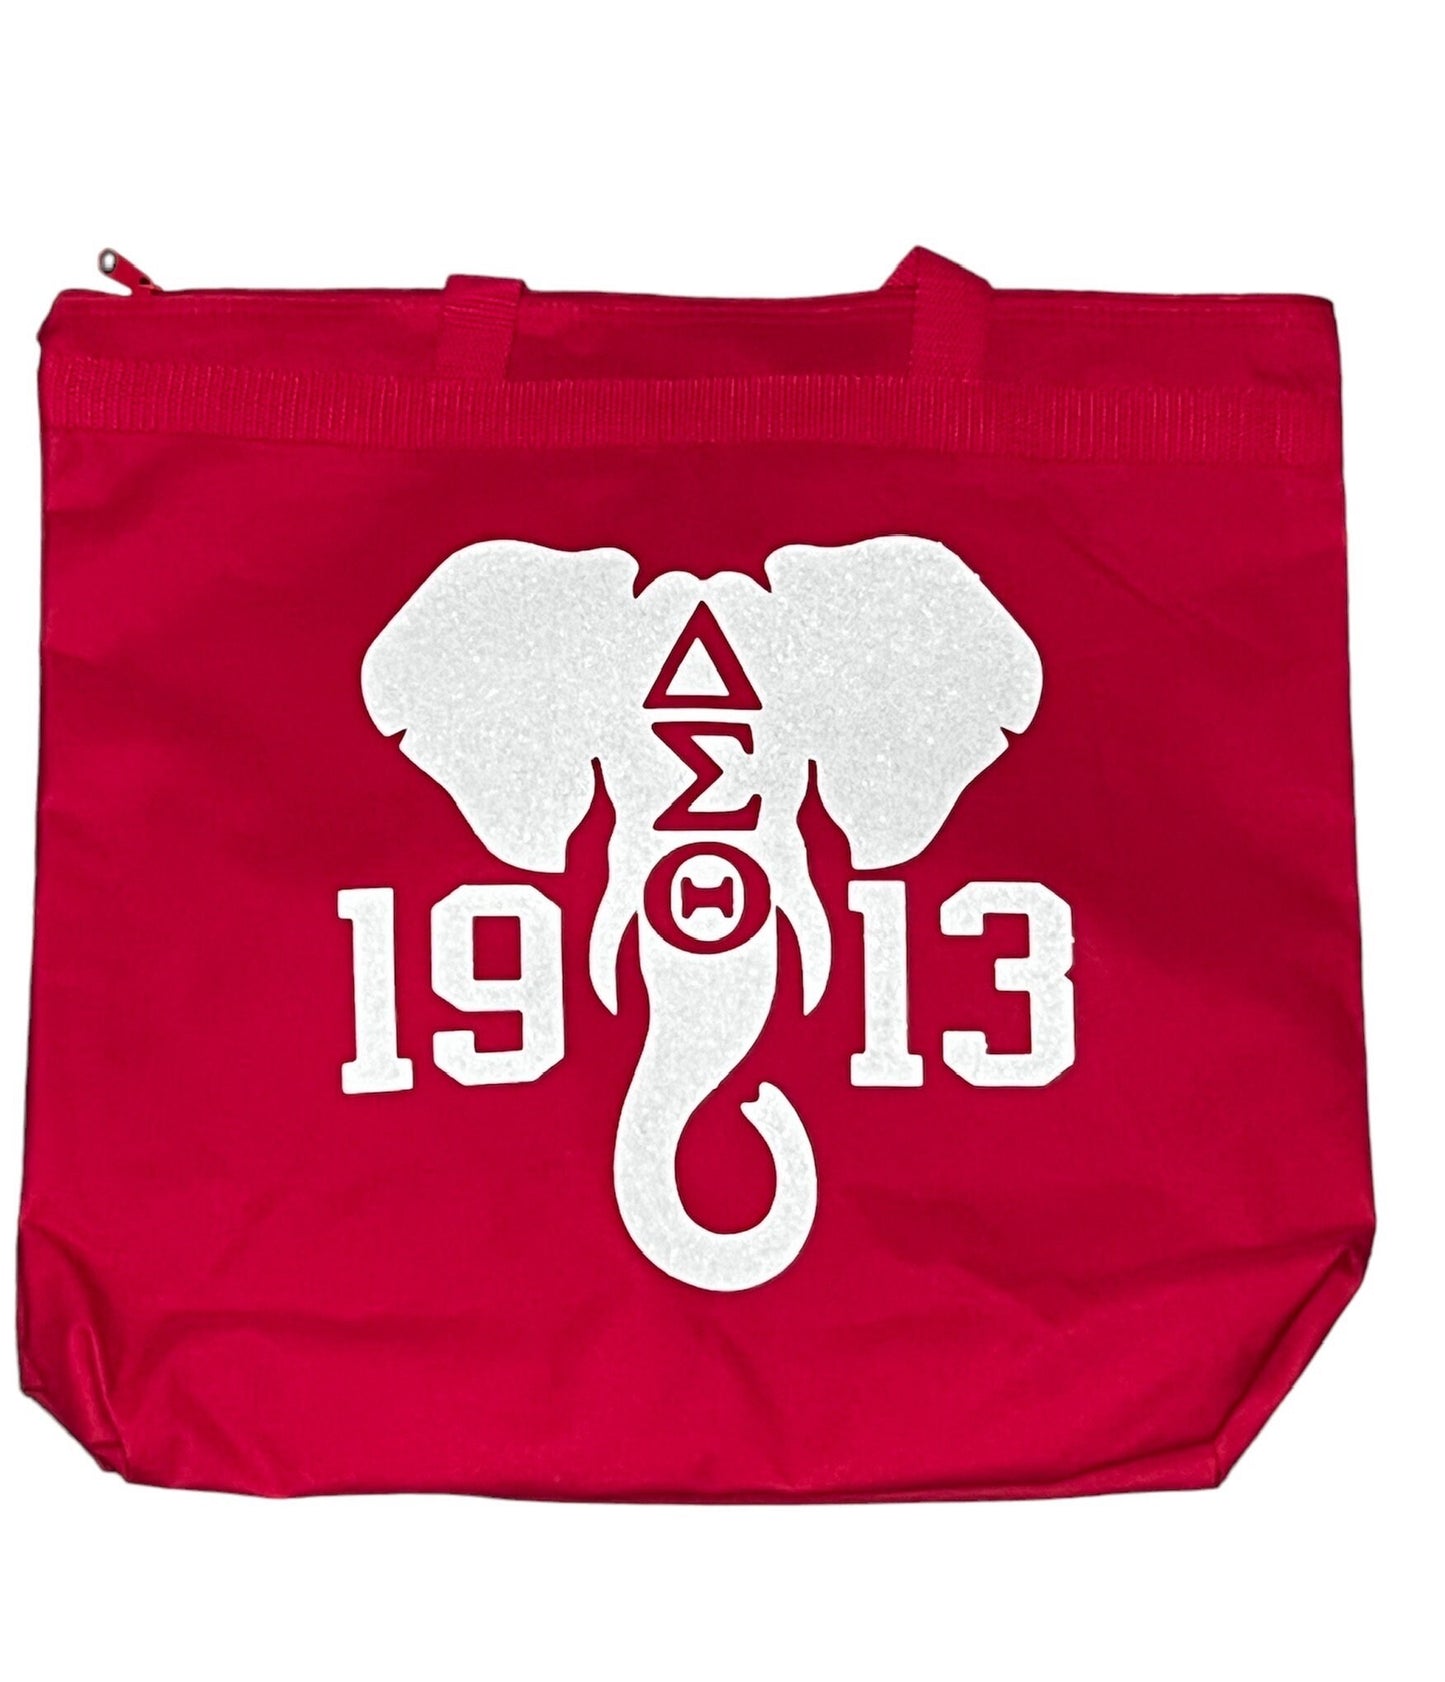 Delta Sigma Theta, Delta 1913 red Logo bag with glitter design and logo on opposite side